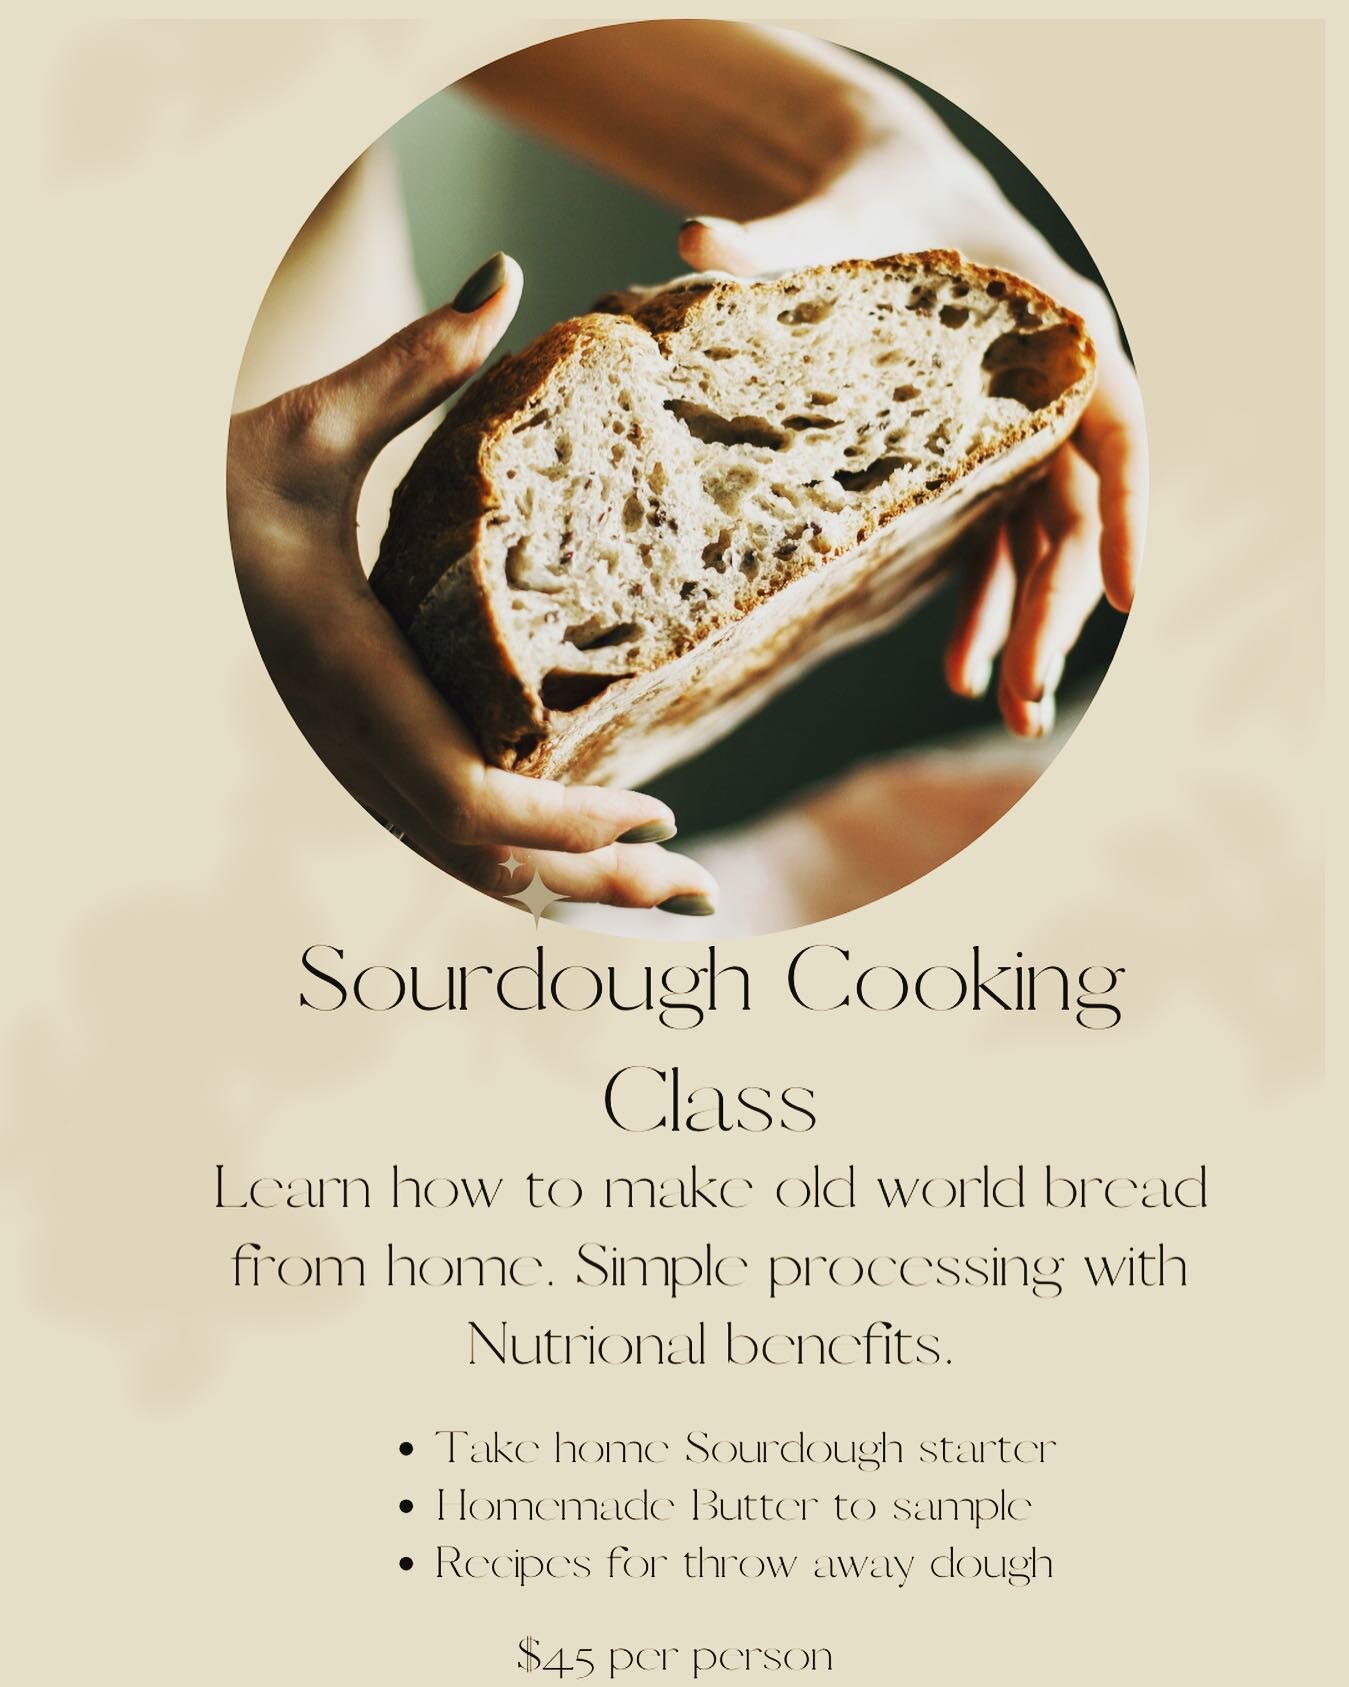 Our sourdough classes are back! 
Just in time for cool weather

Our class will learn:
Each step to make perfect sourdough
Tips and tricks to keep your starter alive 
How to make specialty food with discard
Diy butter 

You will receive:
An aged sourd